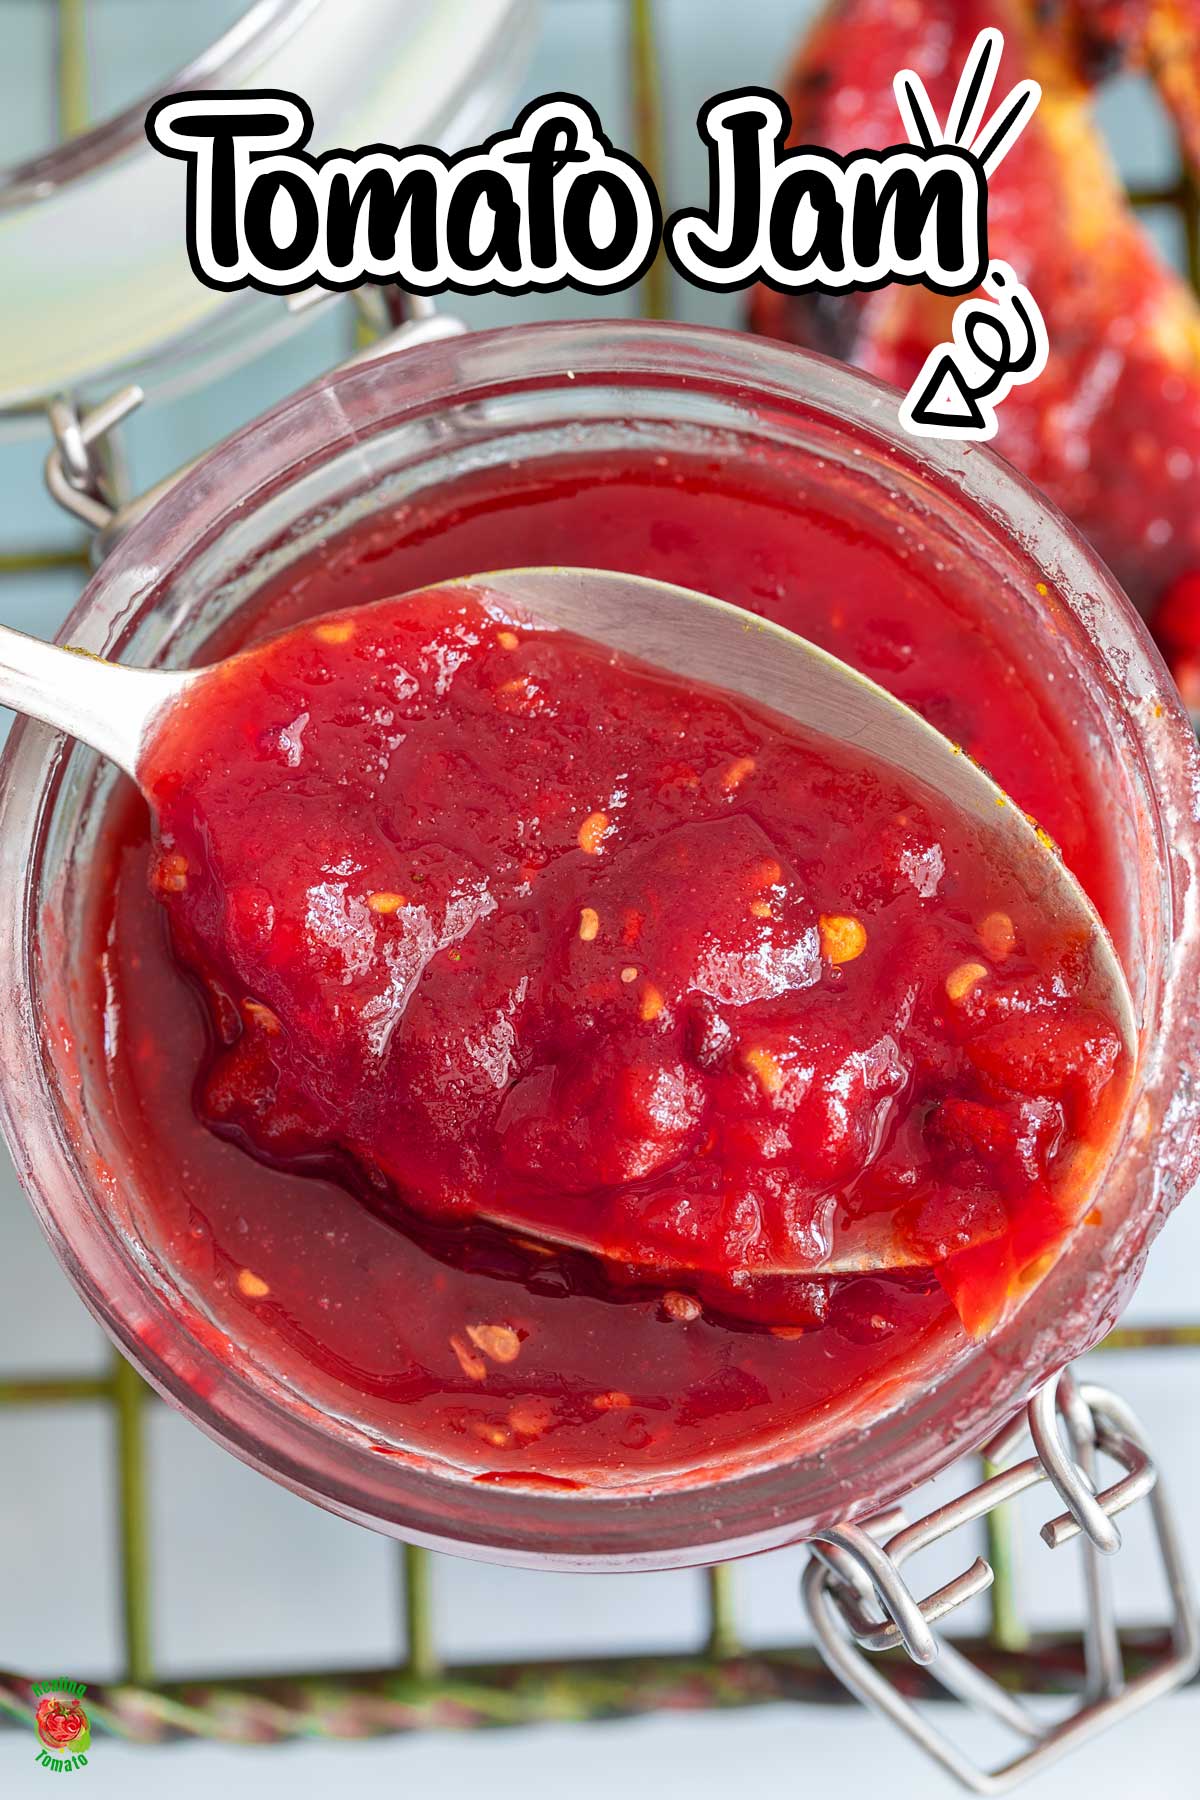 Top view of a spoon with tomato jam resting on the top of a glass jar.